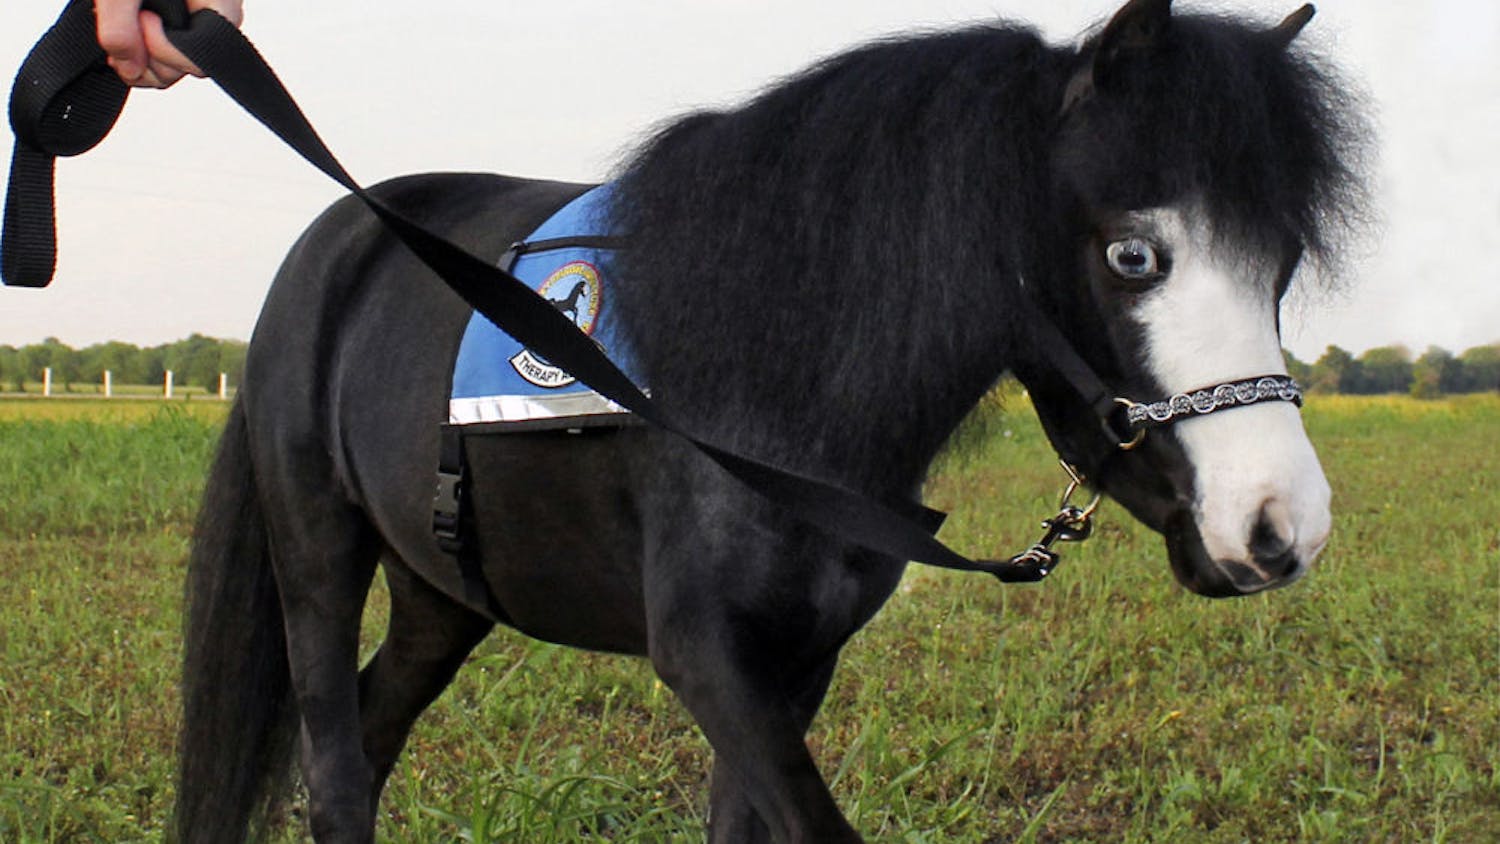 Magic, the 8-year-old American Miniature horse, stands in a field while on a walk. Magic, who is a therapy horse, was inducted into the U.S. Equestrian Foundation’s Horse Stars Hall of Fame for her inspirational impact on the public.